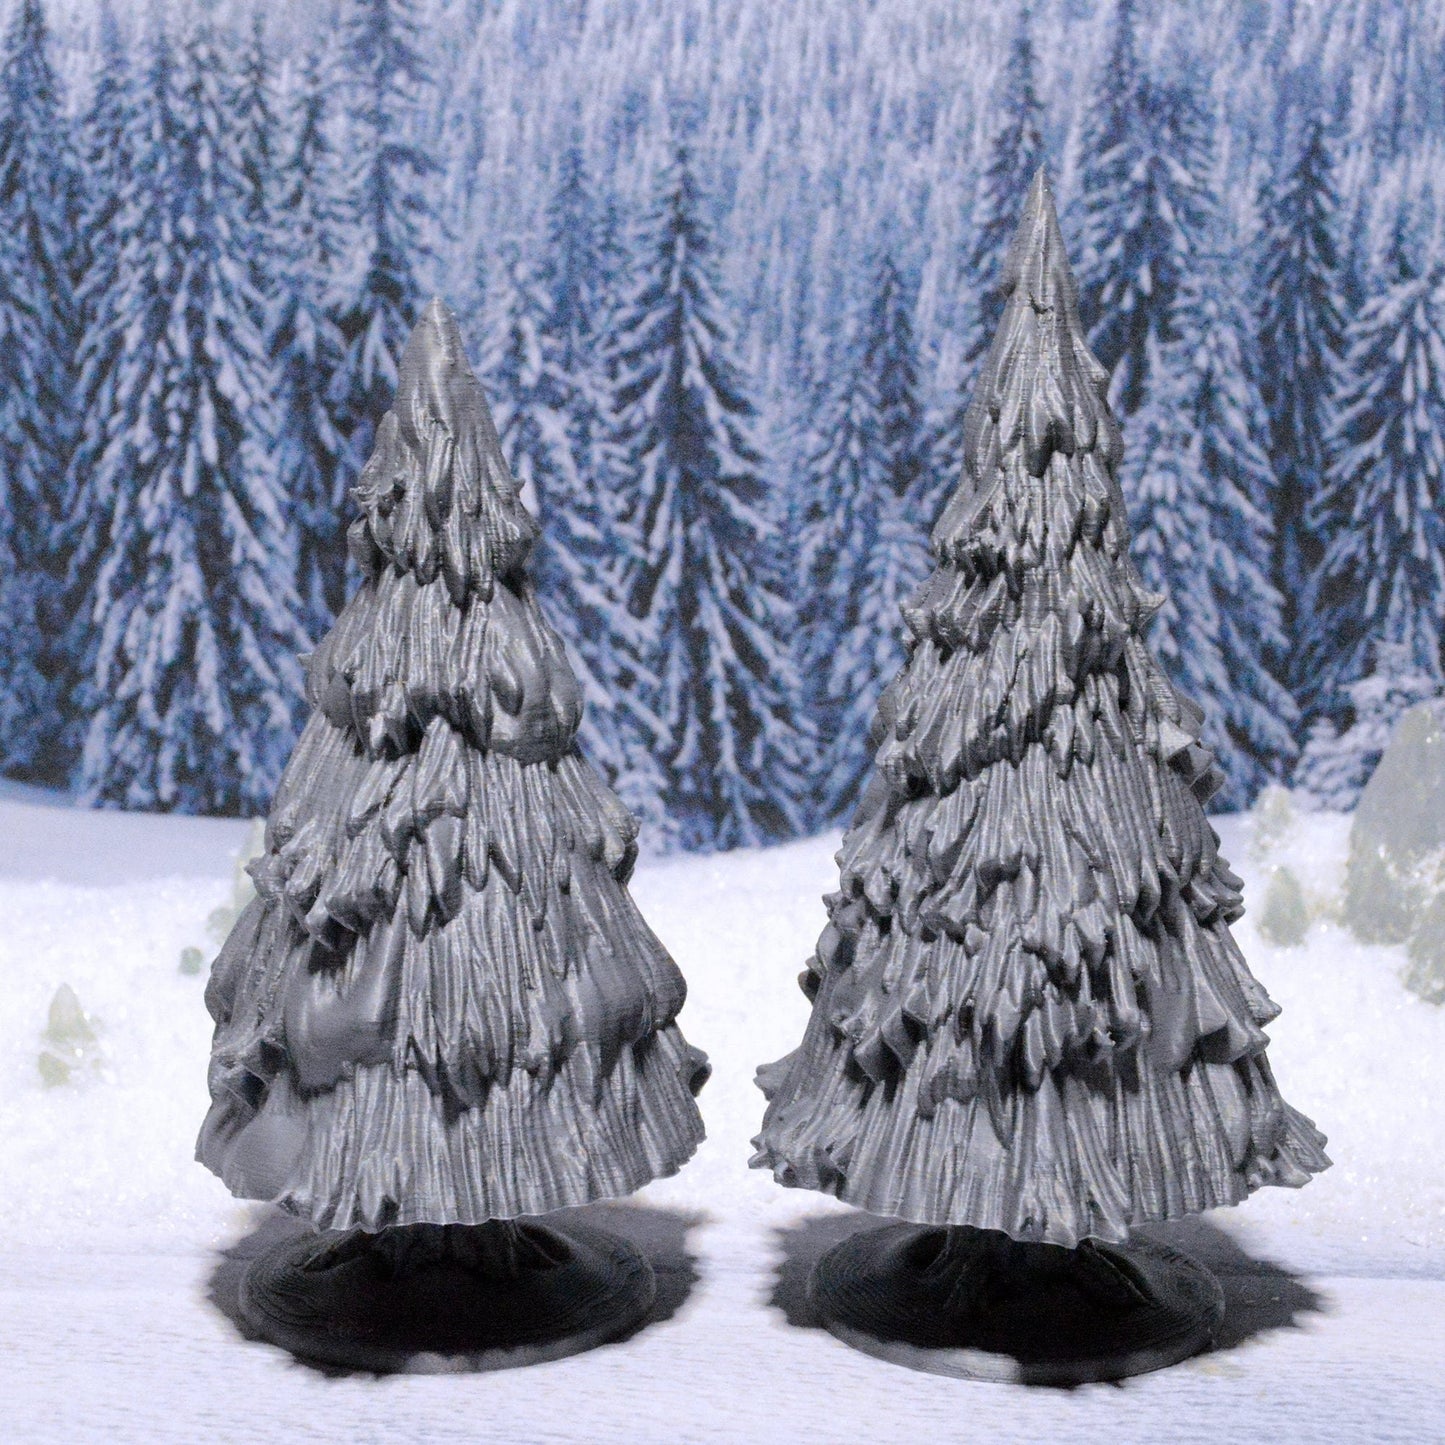 Miniature Snowy Pine Trees 15mm 28mm 32mm for D&D Terrain, DnD Pathfinder Wargame Forest